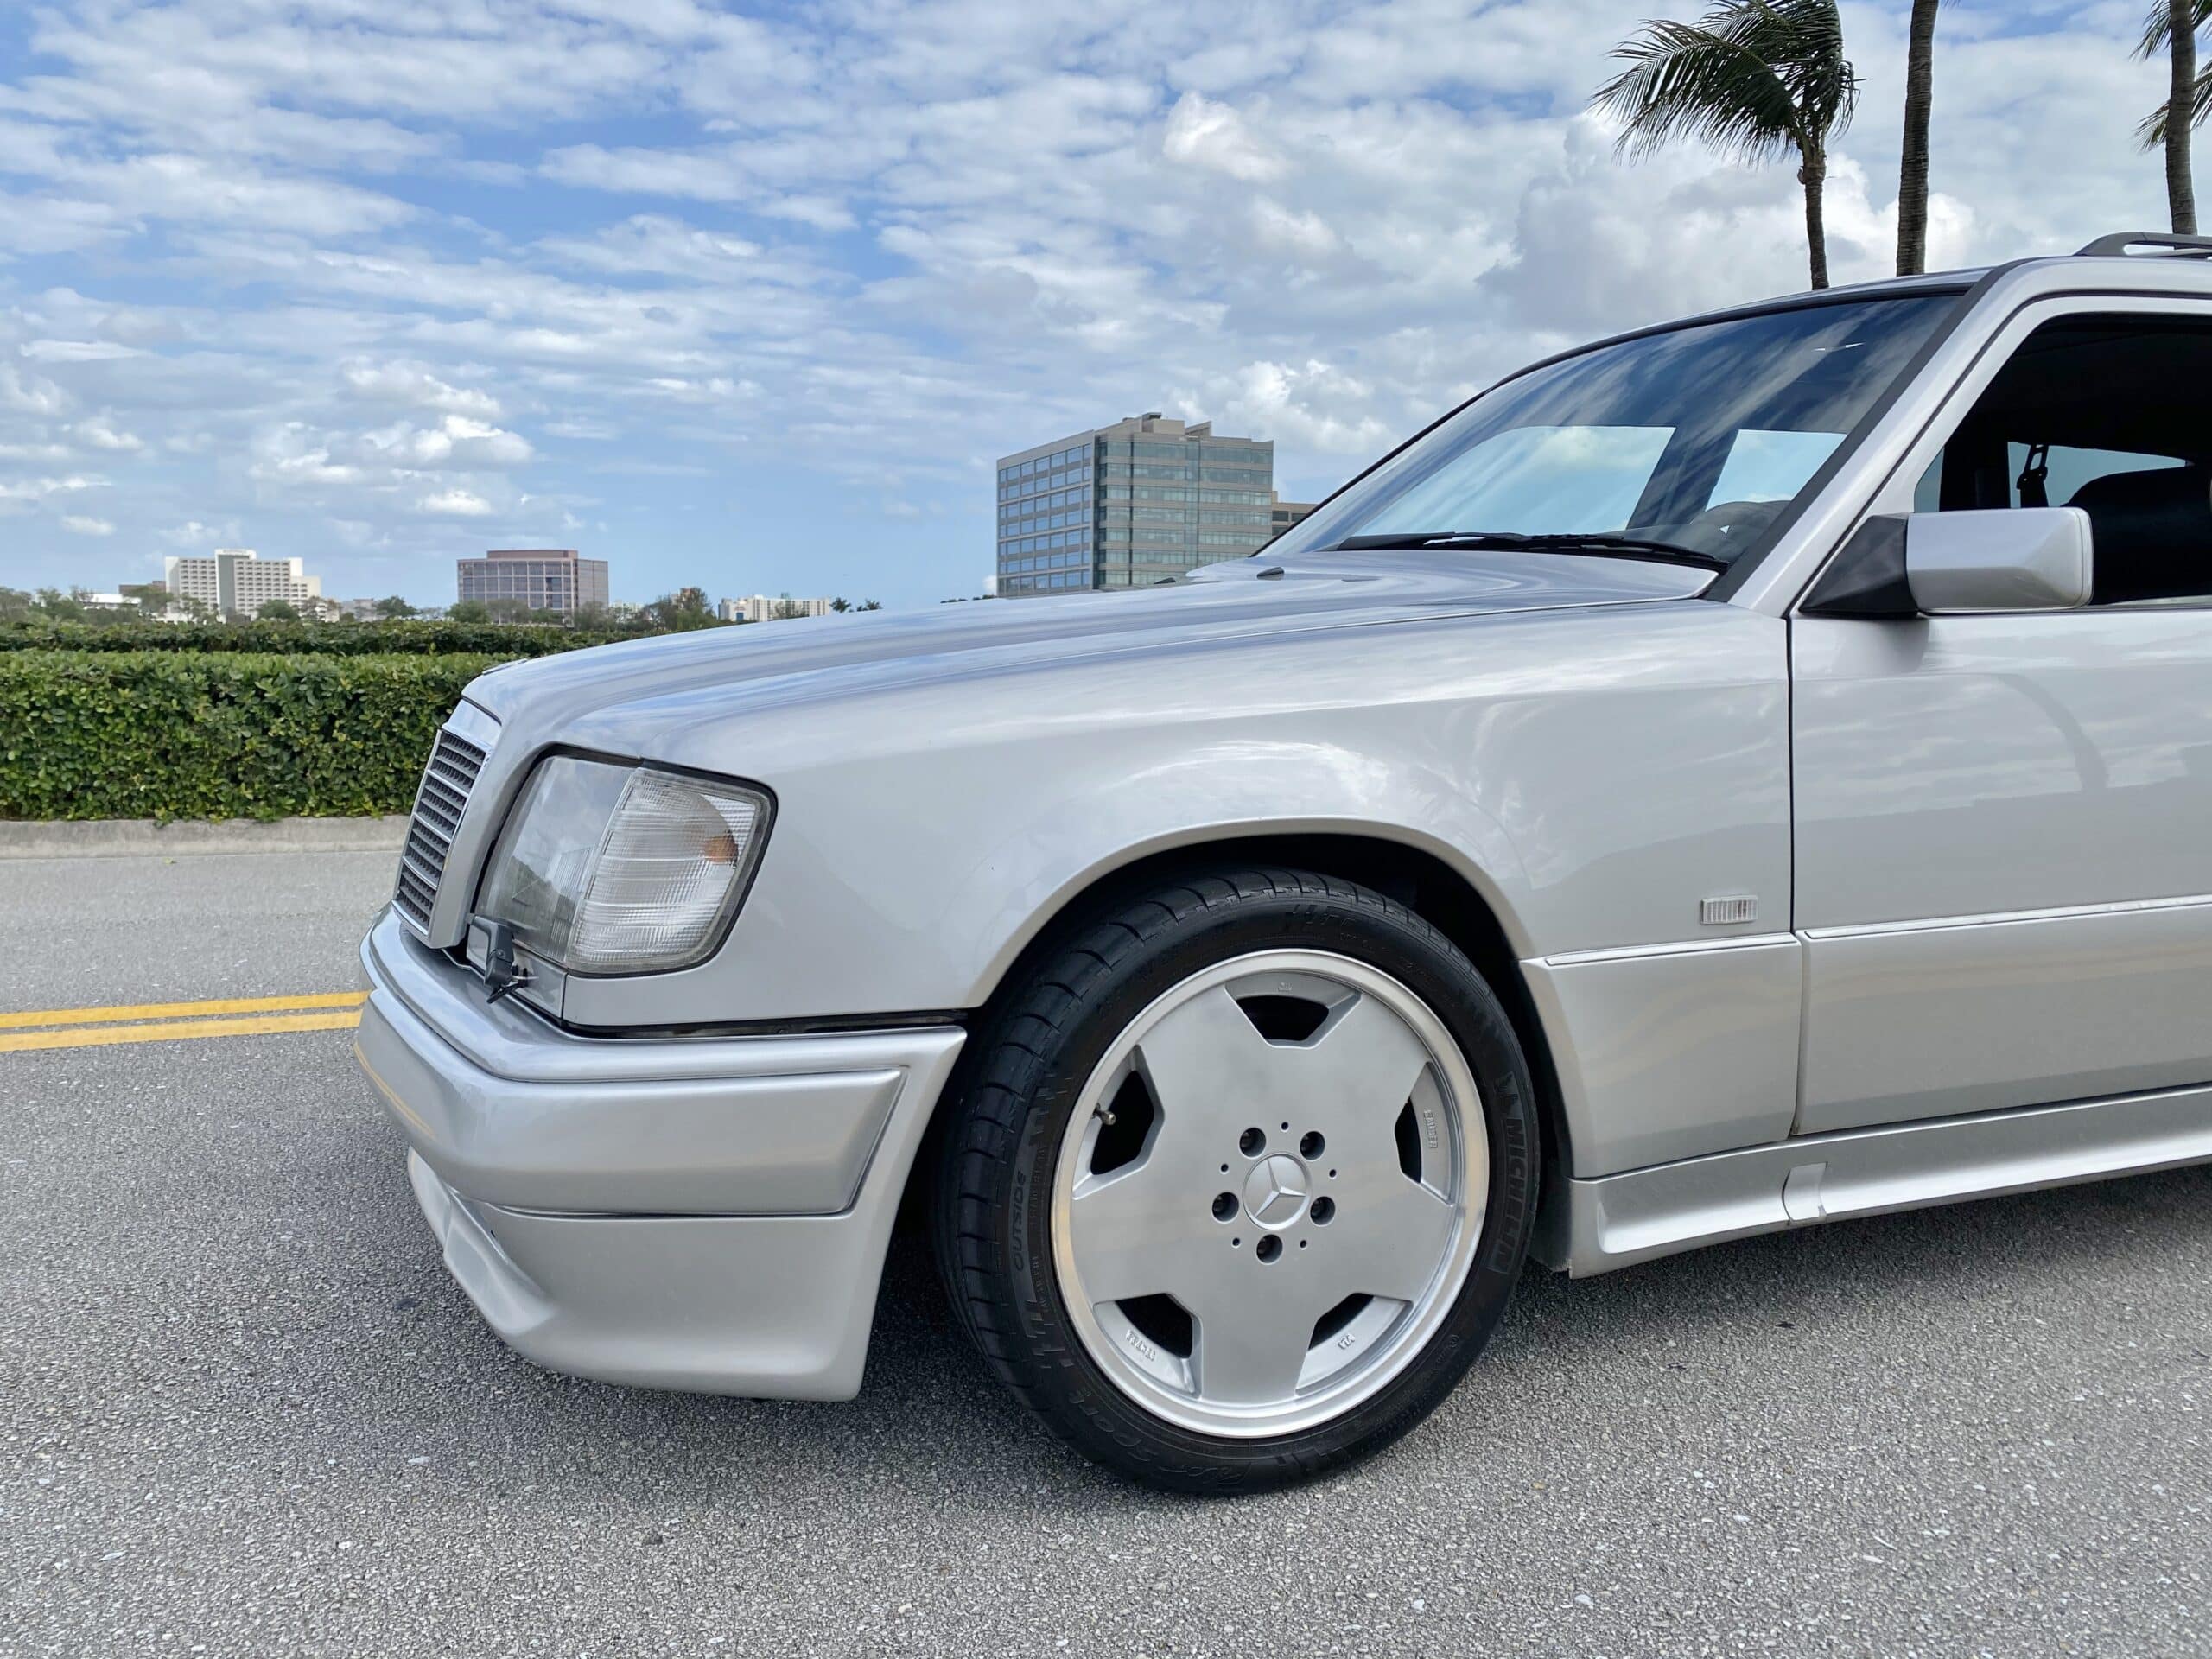 1995 Mercedes-Benz E36 AMG W-124 Rare 1 of 170 AMG E36 Wagons built – Matching numbers – Only 70K Miles -Like New